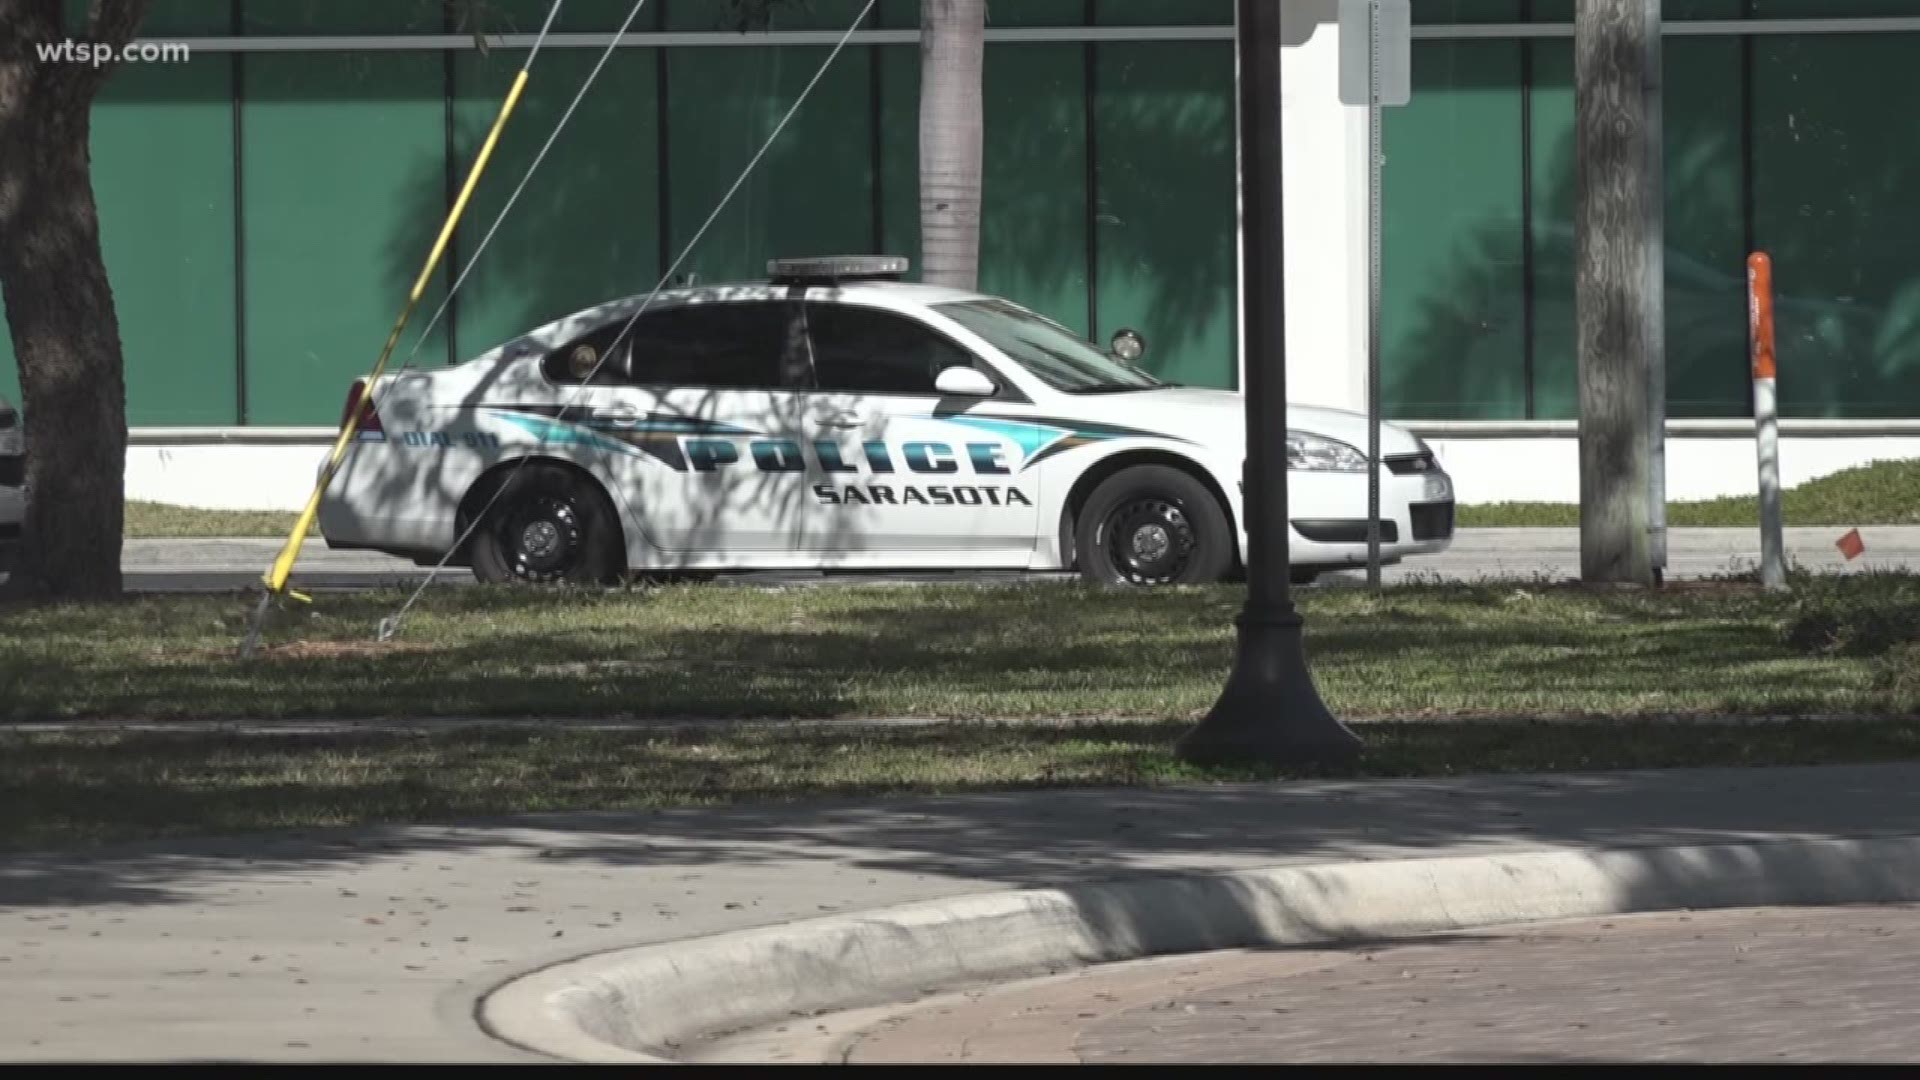 Two more teenagers have been arrested and accused of beating an off-duty police officer who tried to stop them from harassing a homeless person earlier this month in Sarasota.